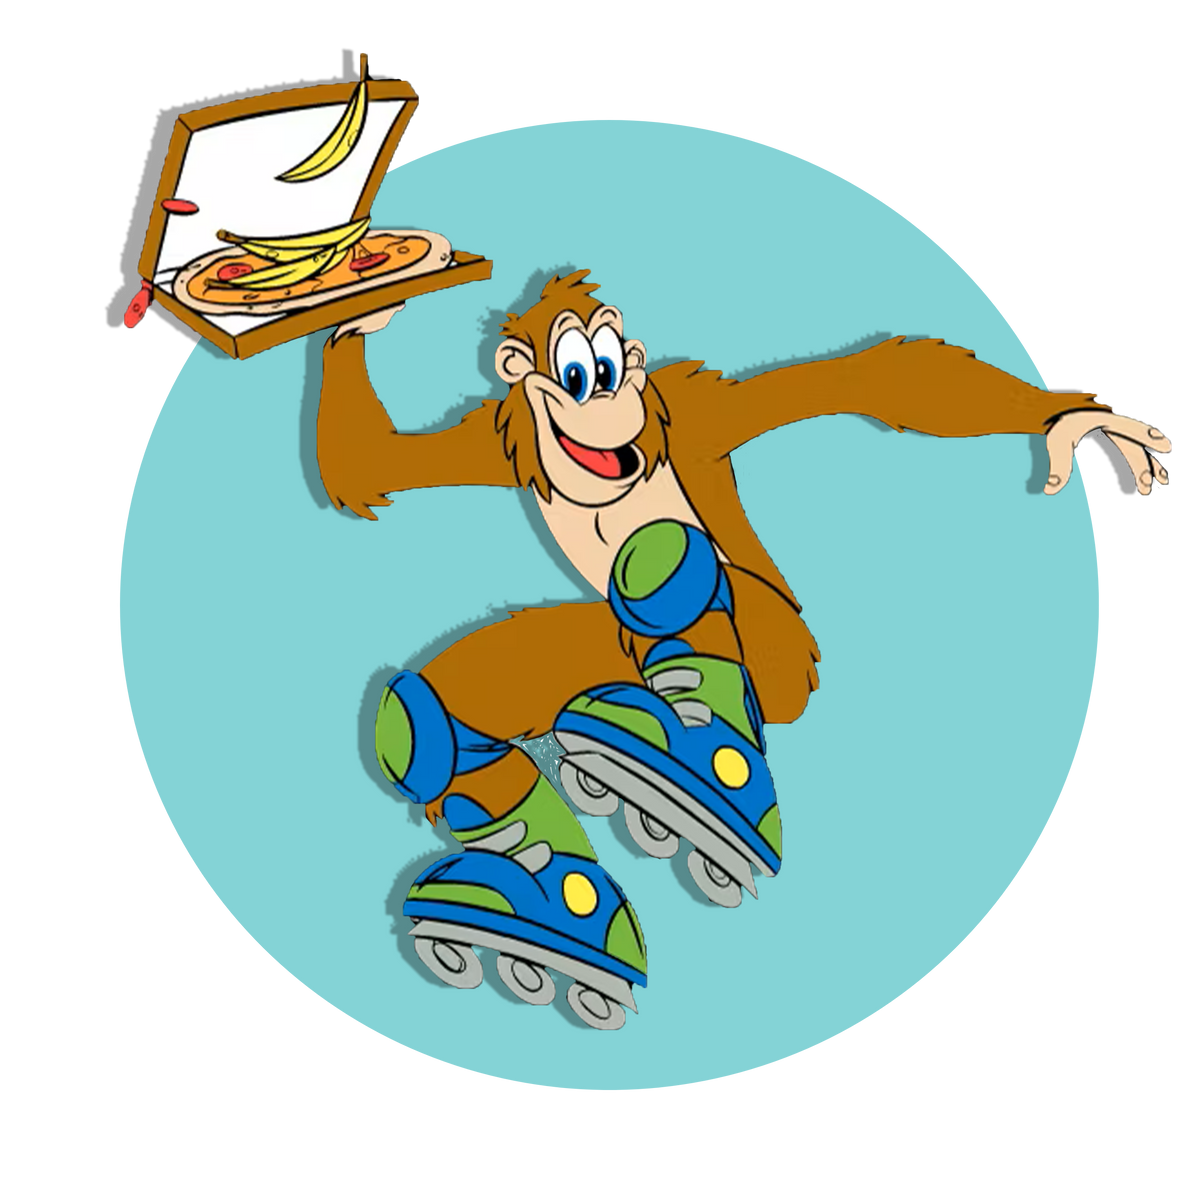 a whimsical illustration of a cheerful monkey on roller skates, holding a pizza with one slice partly out, which is placed on an artist’s palette. The background is a simple light blue circle. 